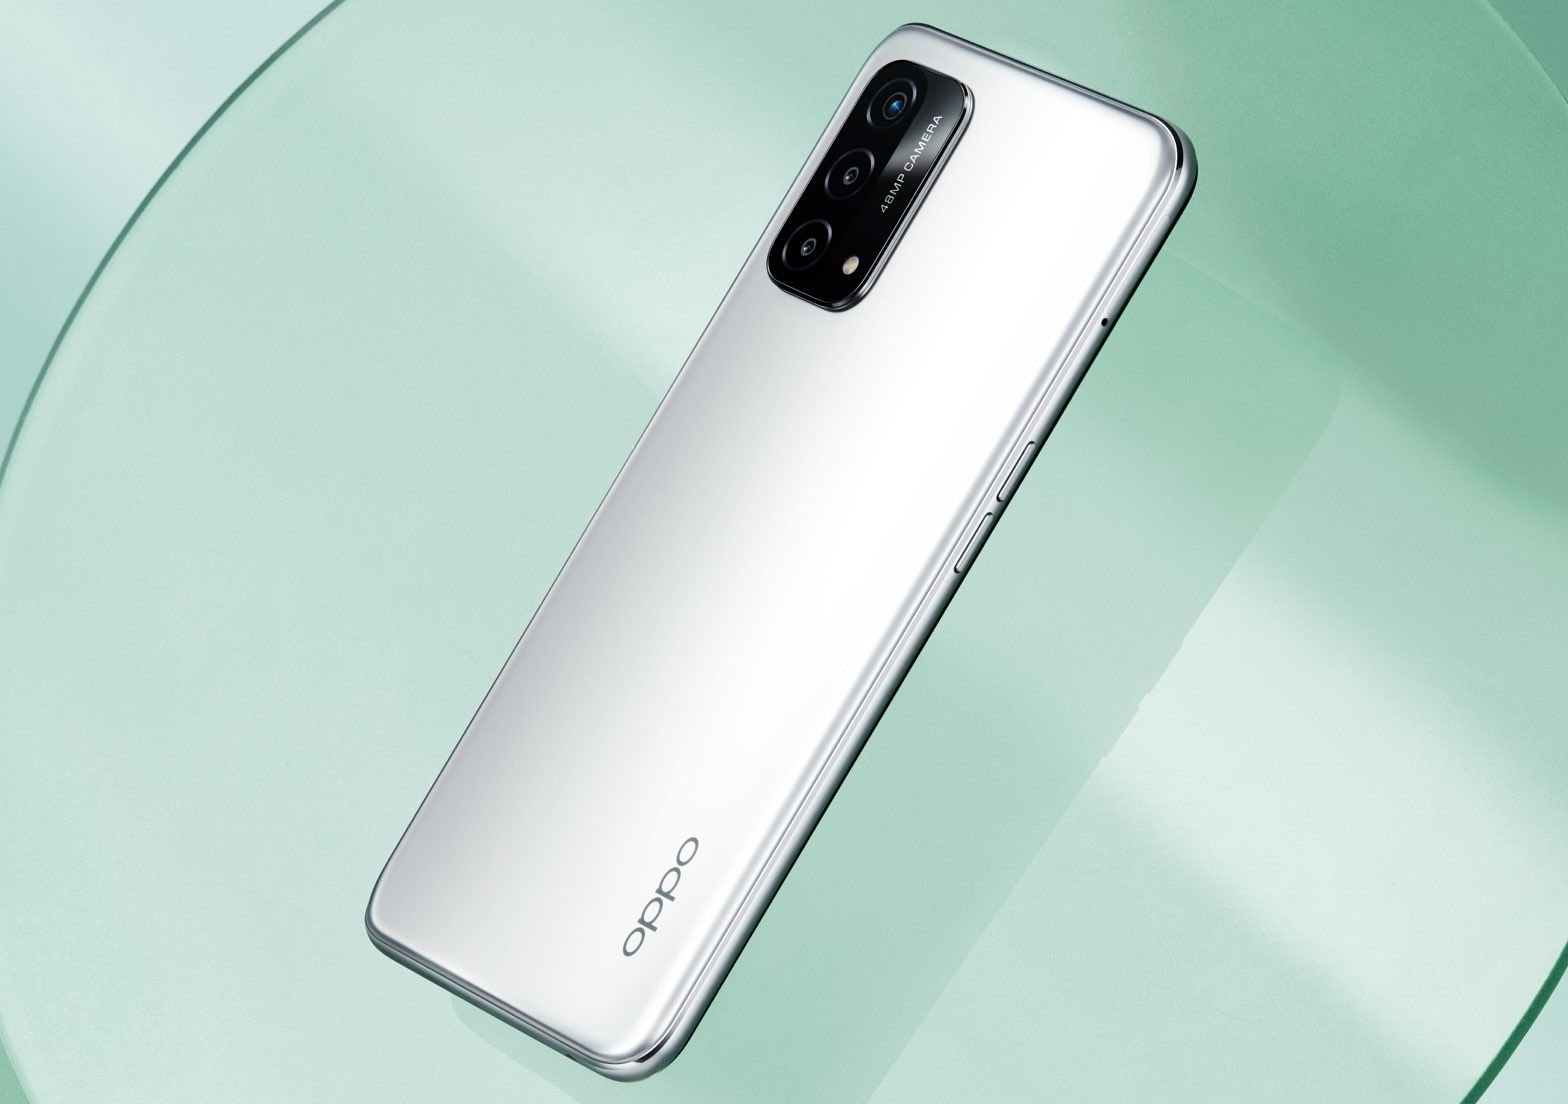 OPPO A93 5G debut as the second smartphone with Snapdragon 480 CPU